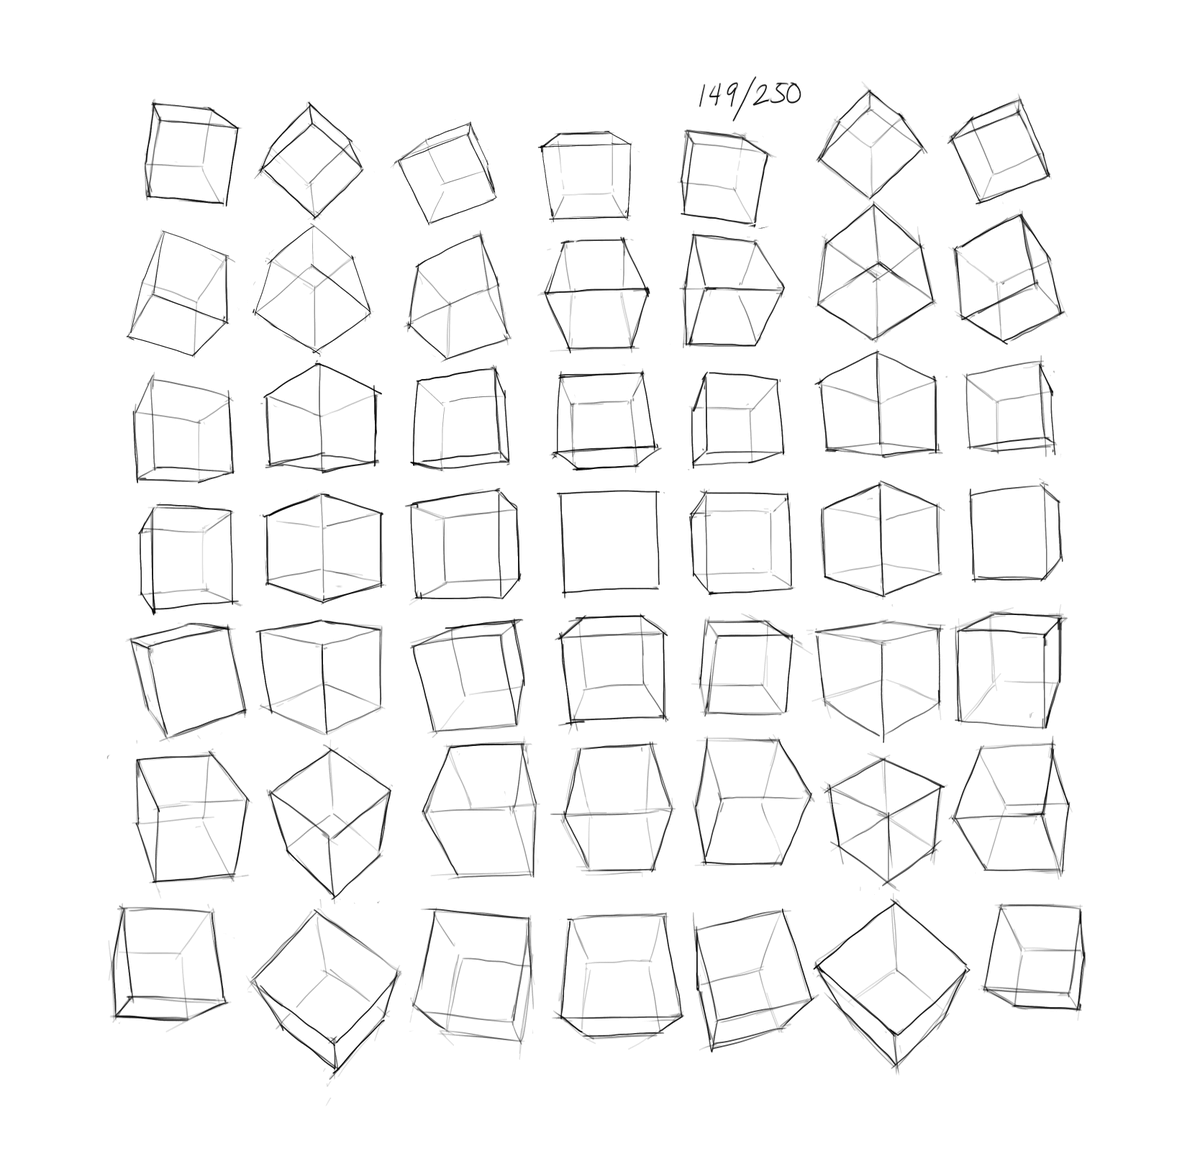 hi #portfolioday the only worthwhile thing i draw is boxes, apparently 